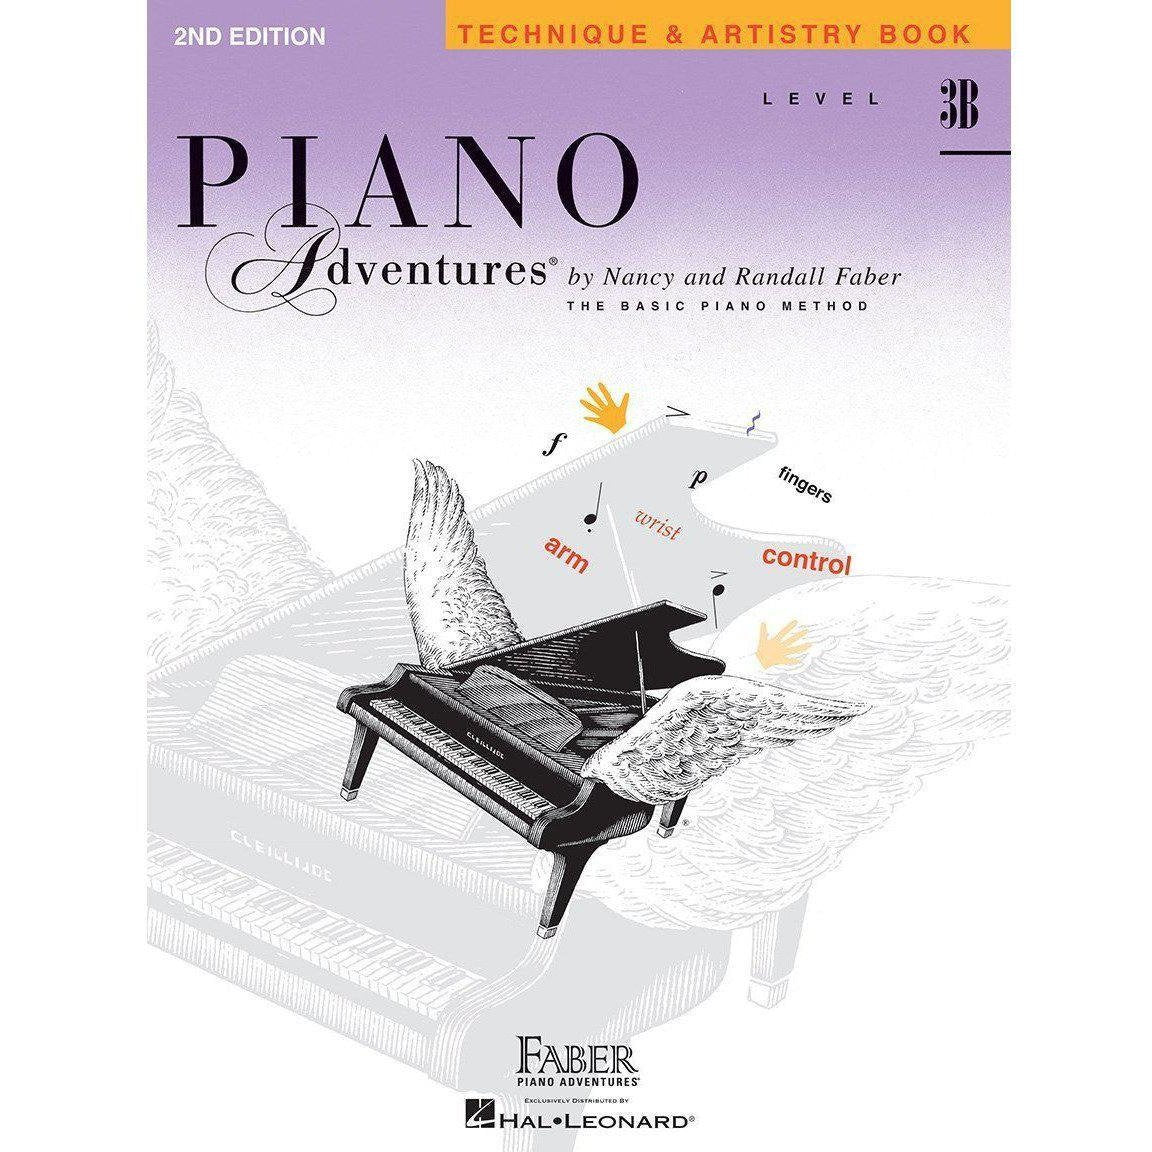 Faber Piano Adventures-3B-Tech & Artistry-Andy's Music